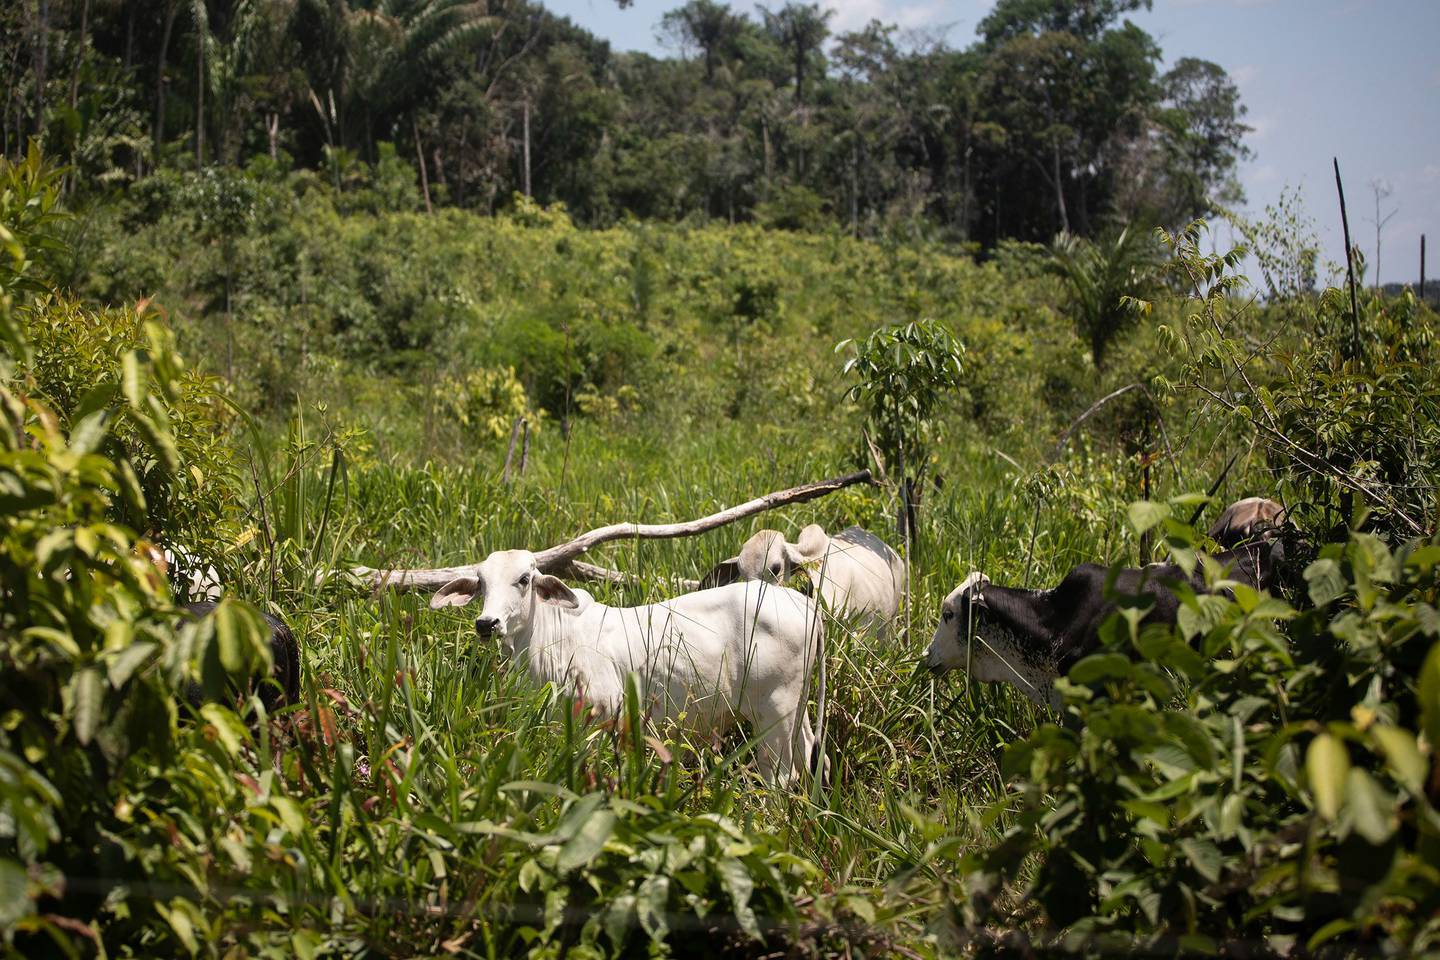 The number of cattle in eight key districts where the Amazon is suffering high levels of deforestation almost doubled to 2.1 million last year from 2016, Photographer: Ivan Valencia/Bloombergdfd